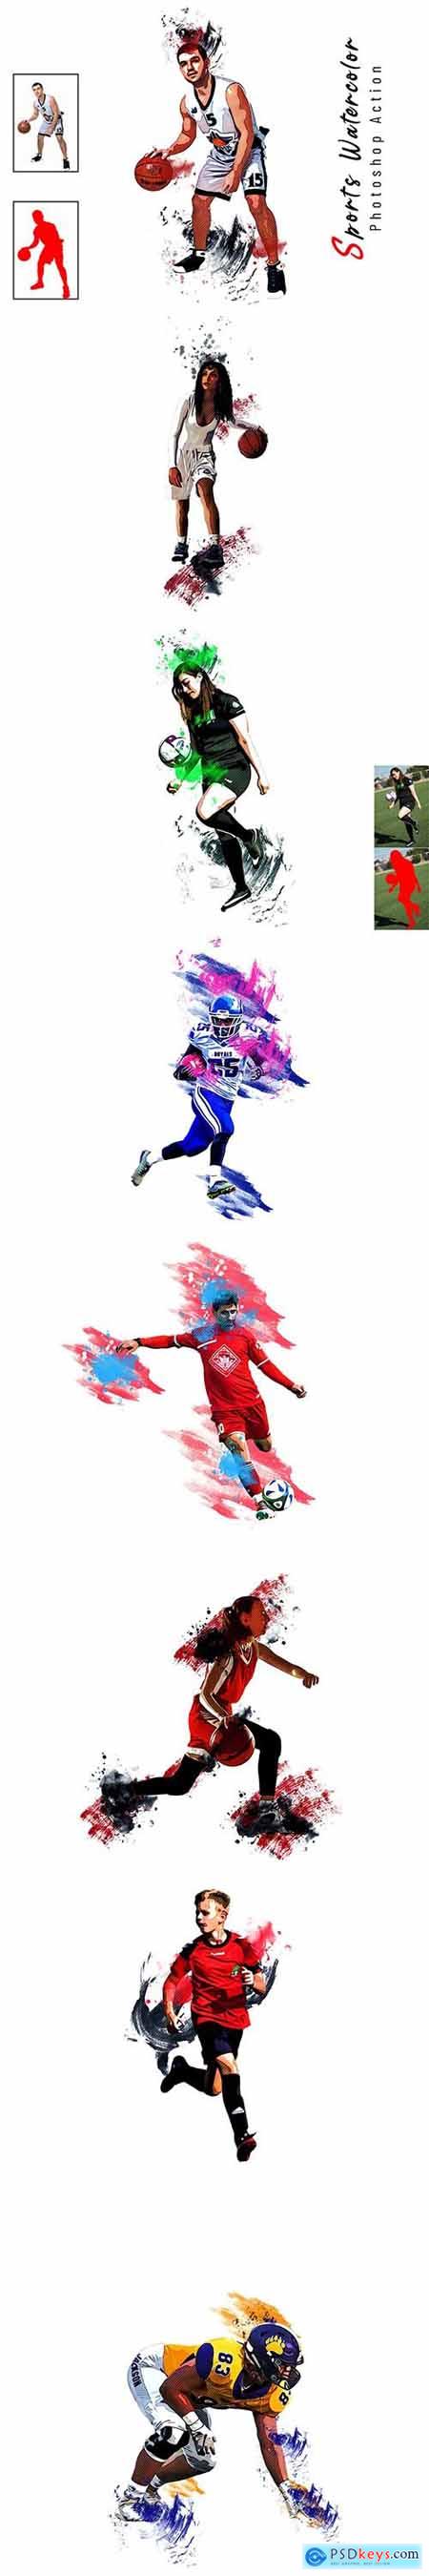 Sports Watercolor Photoshop Action 6725657